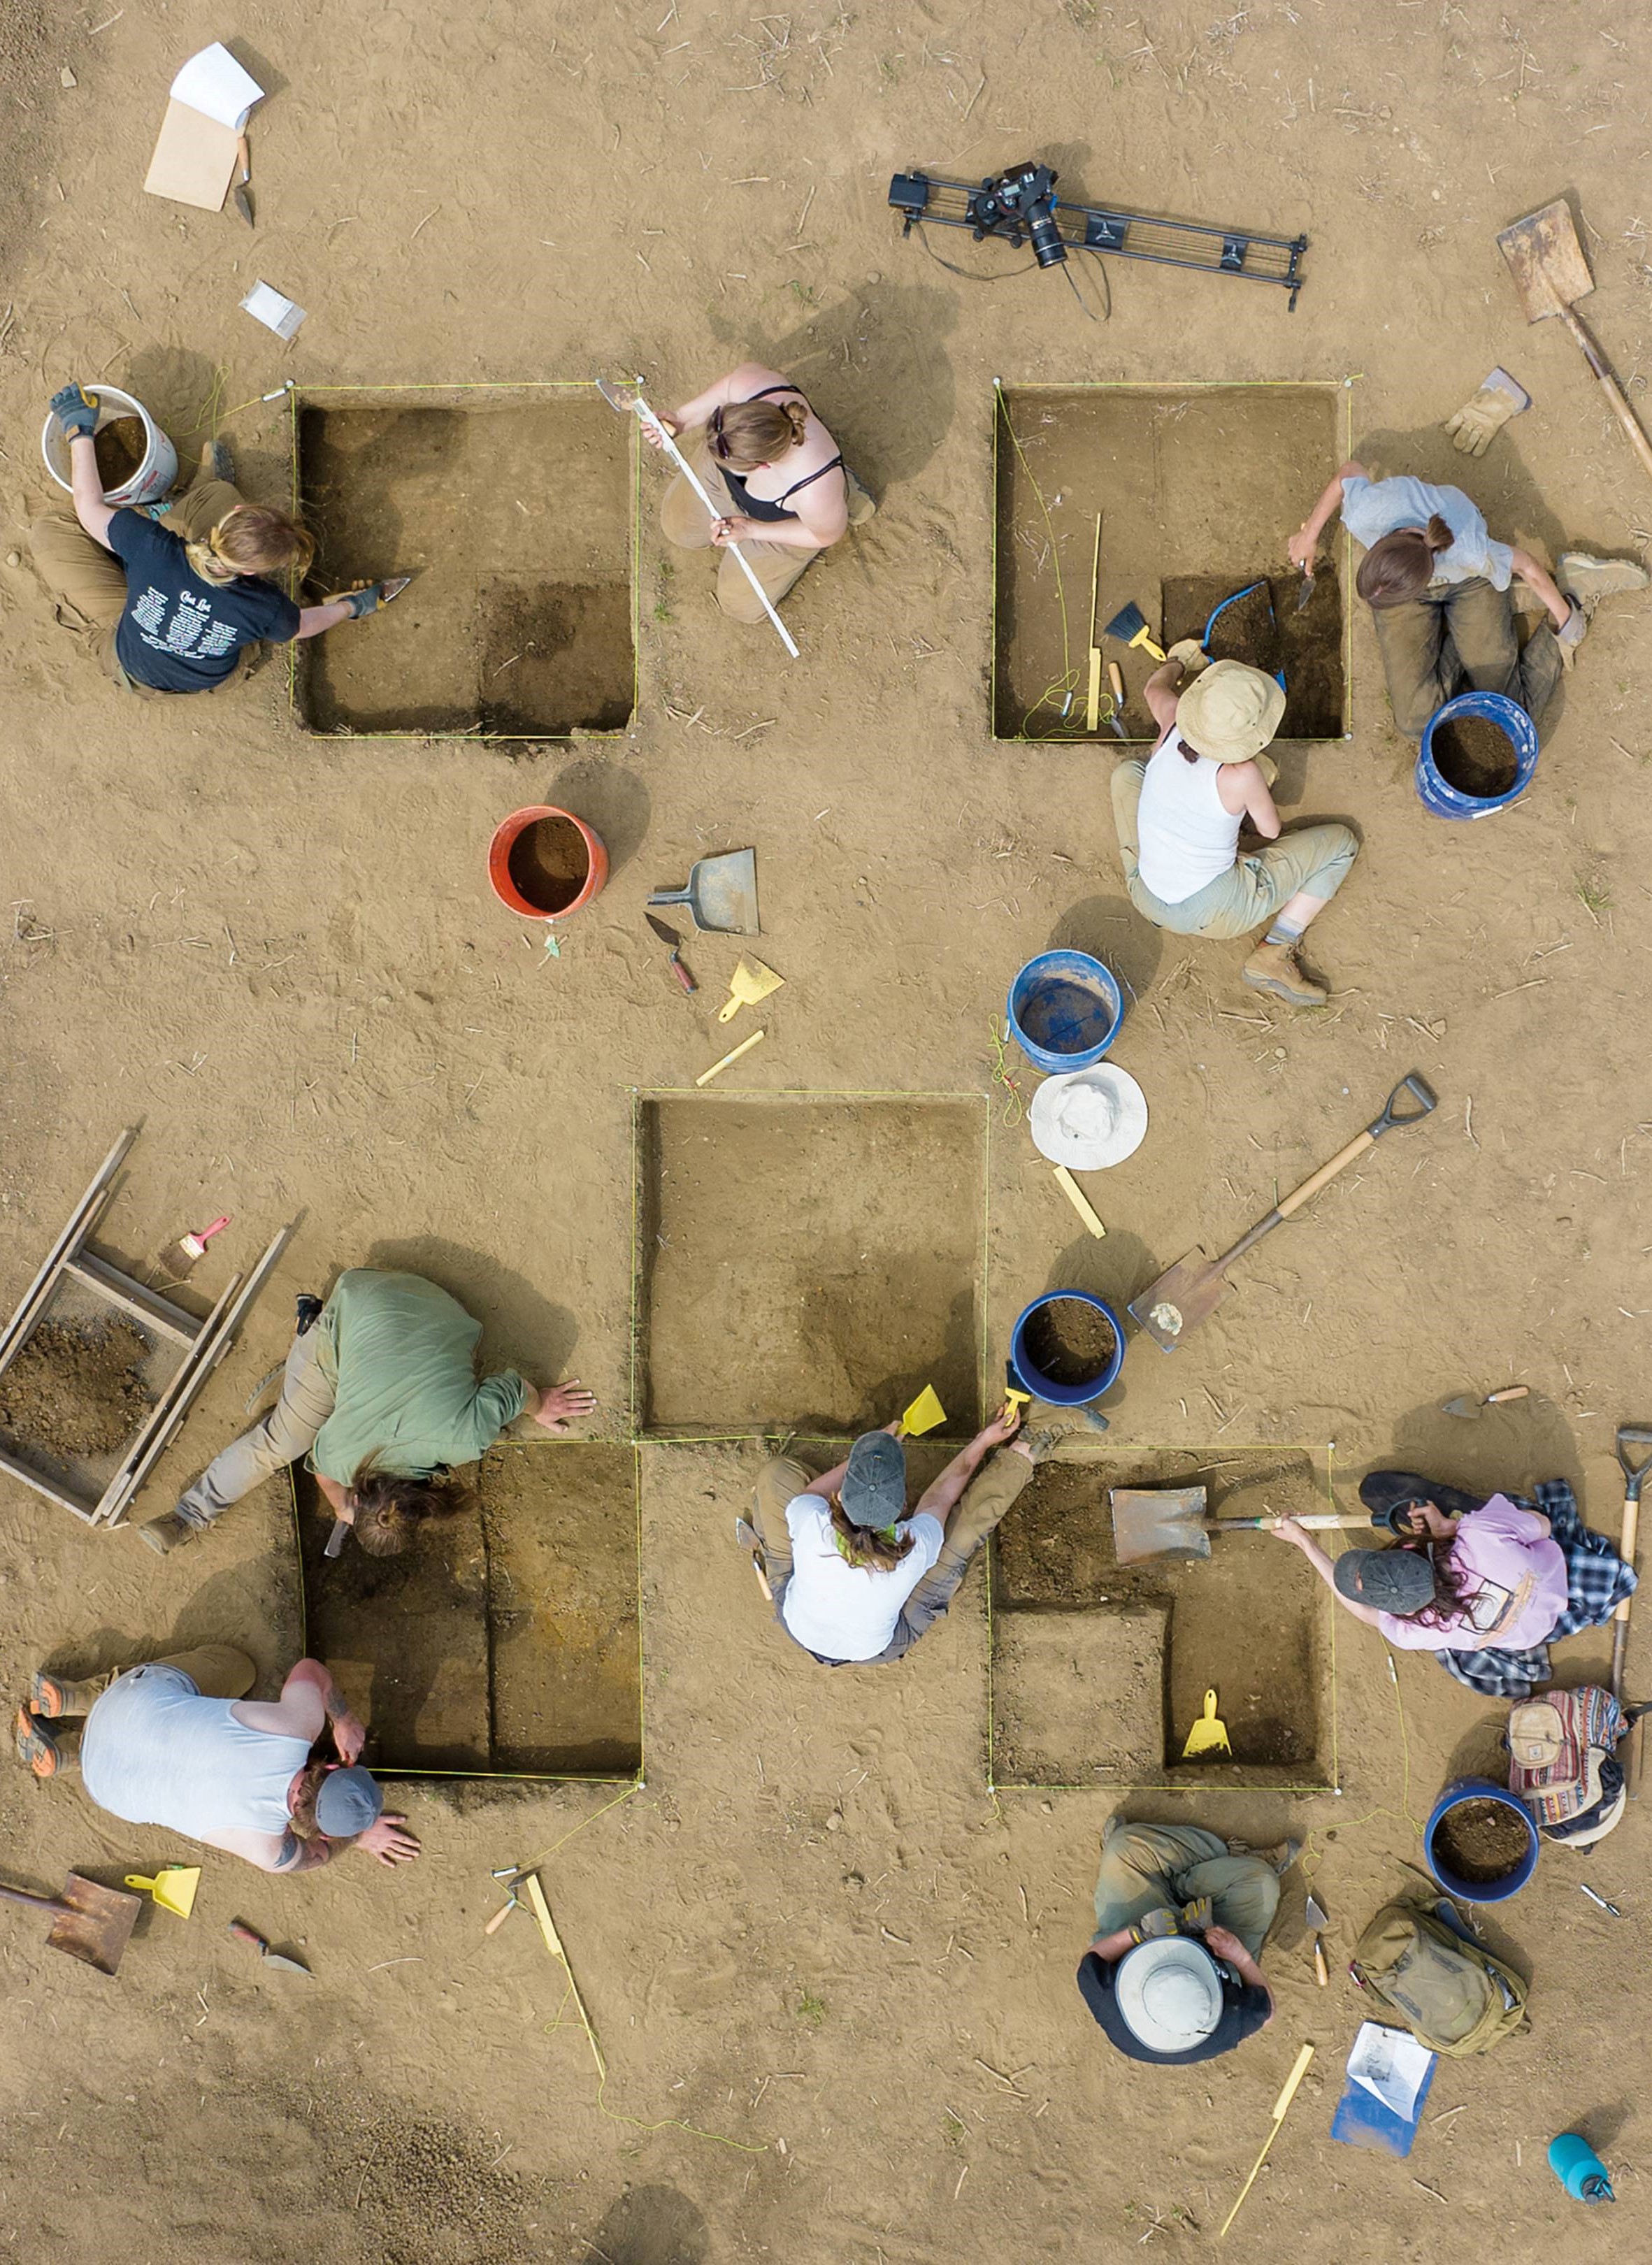 Undergraduate students excavate on a 13,000-year-old site near Lancaster.